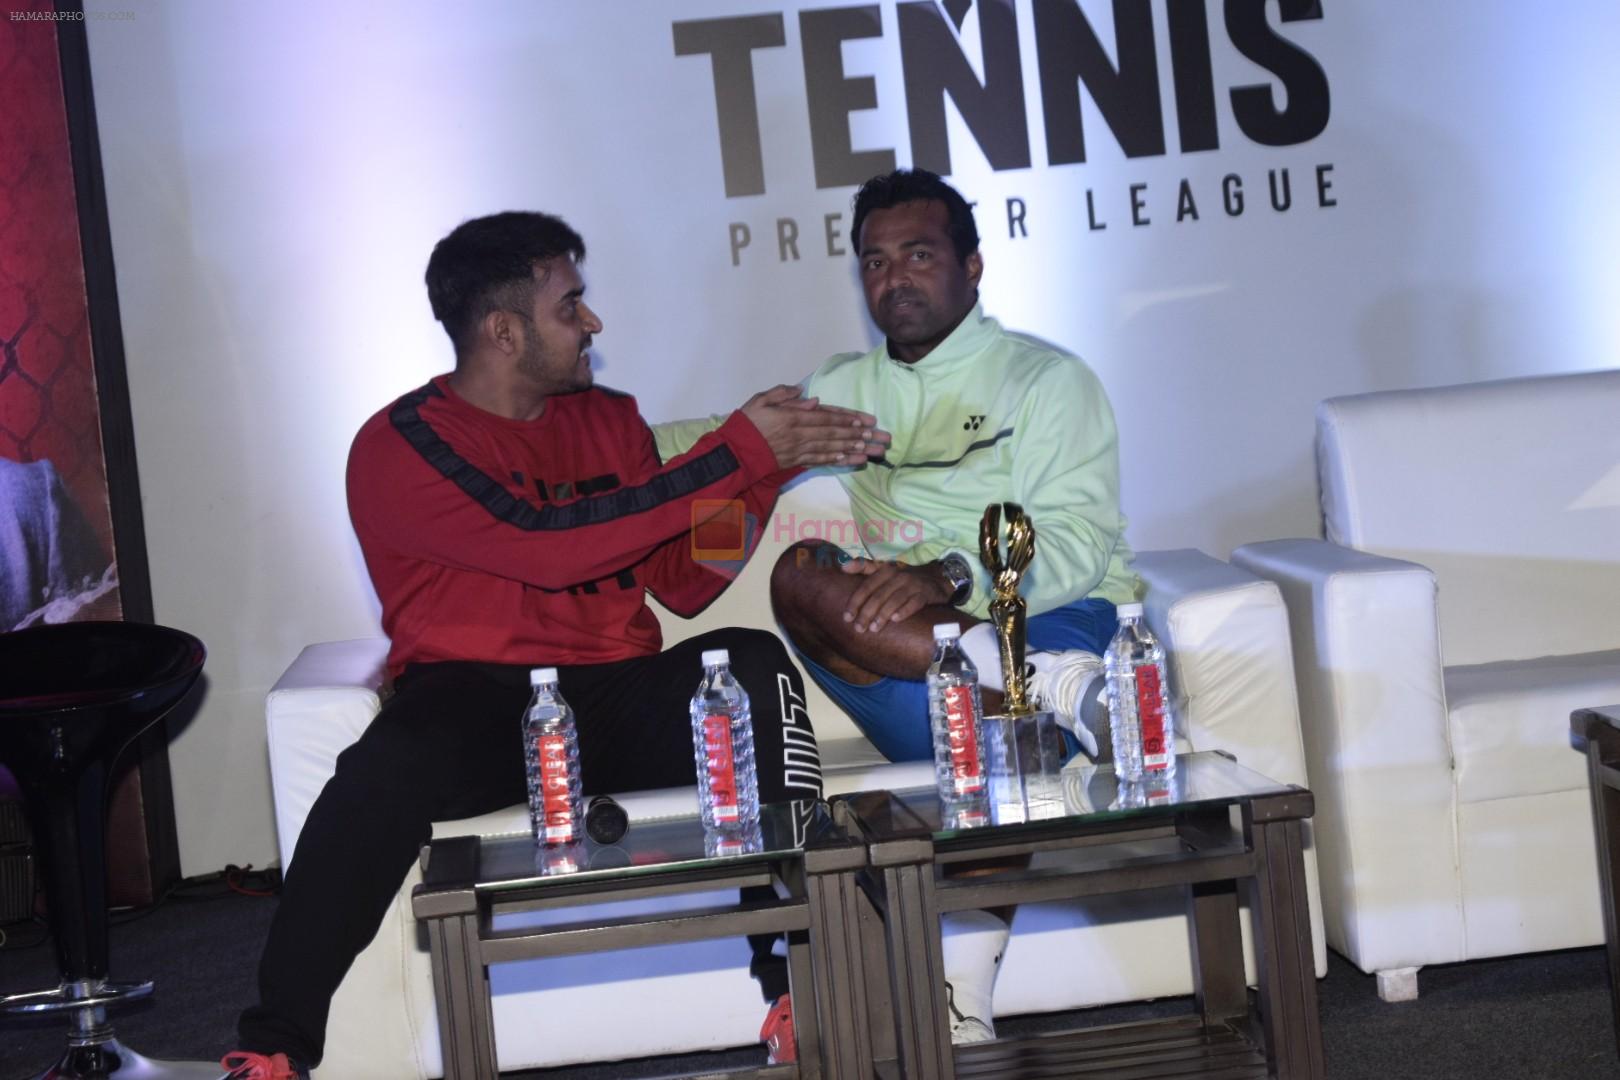 Leander Paes inaugurate India's first tennis premiere league at celebrations club in Andheri on 20th Oct 2018